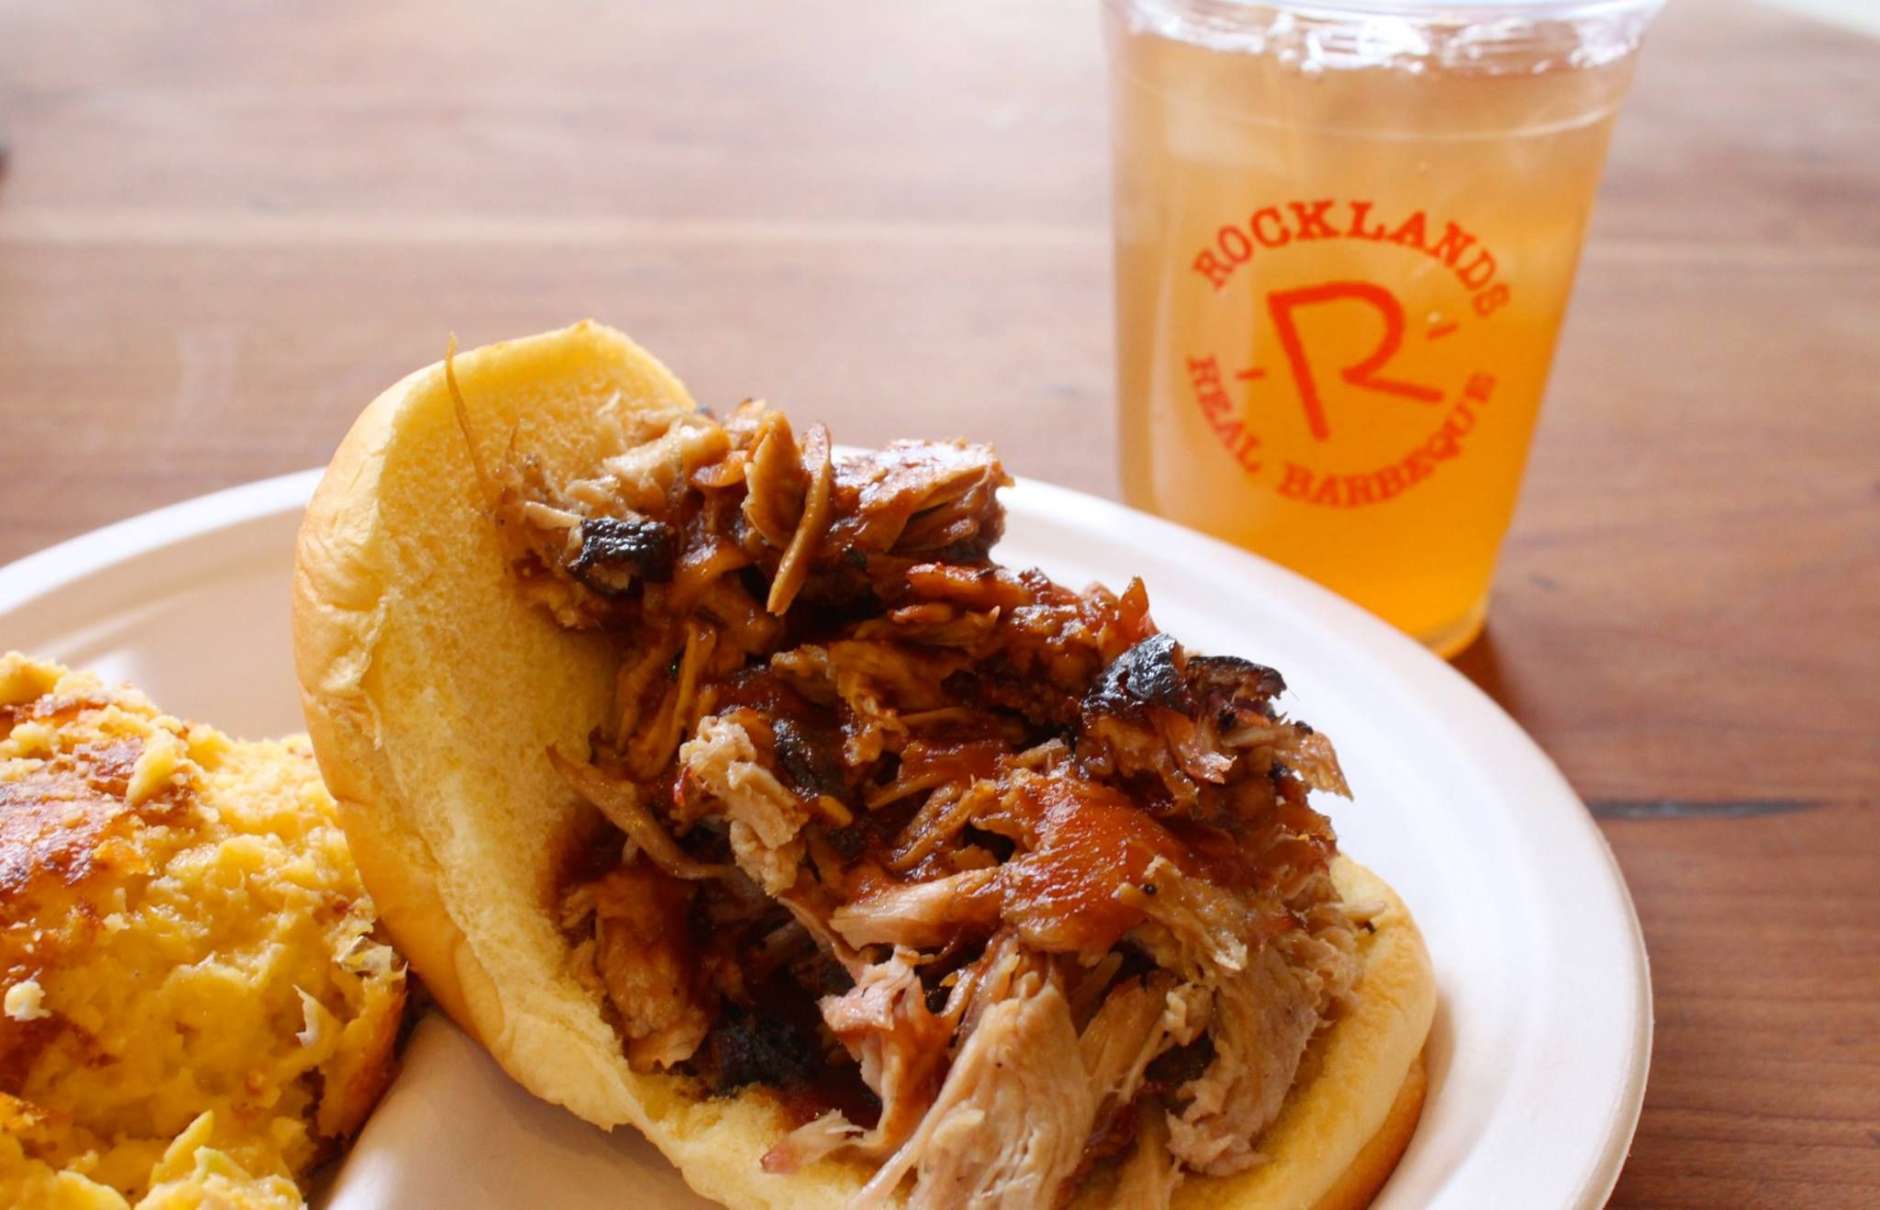 <h3>Best Barbecue</h3>
<h4><a href="https://rocklands.com/" target="_blank" rel="noopener">Rocklands Barbecue and Grilling Company</a></h4>
<p><em>Locations in D.C. and Alexandria and Arlington in Virginia </em></p>
<p>Runner-up: <a href="https://redhotandblue.com/" target="_blank" rel="noopener">Red, Hot and Blue</a></p>
<p><a href="https://wtop.com/business-finance/2023/08/wtop-top-10-2023-best-barbecue/" target="_blank" rel="noopener">See the TOP 10 places with the best barbecue</a>.</p>
